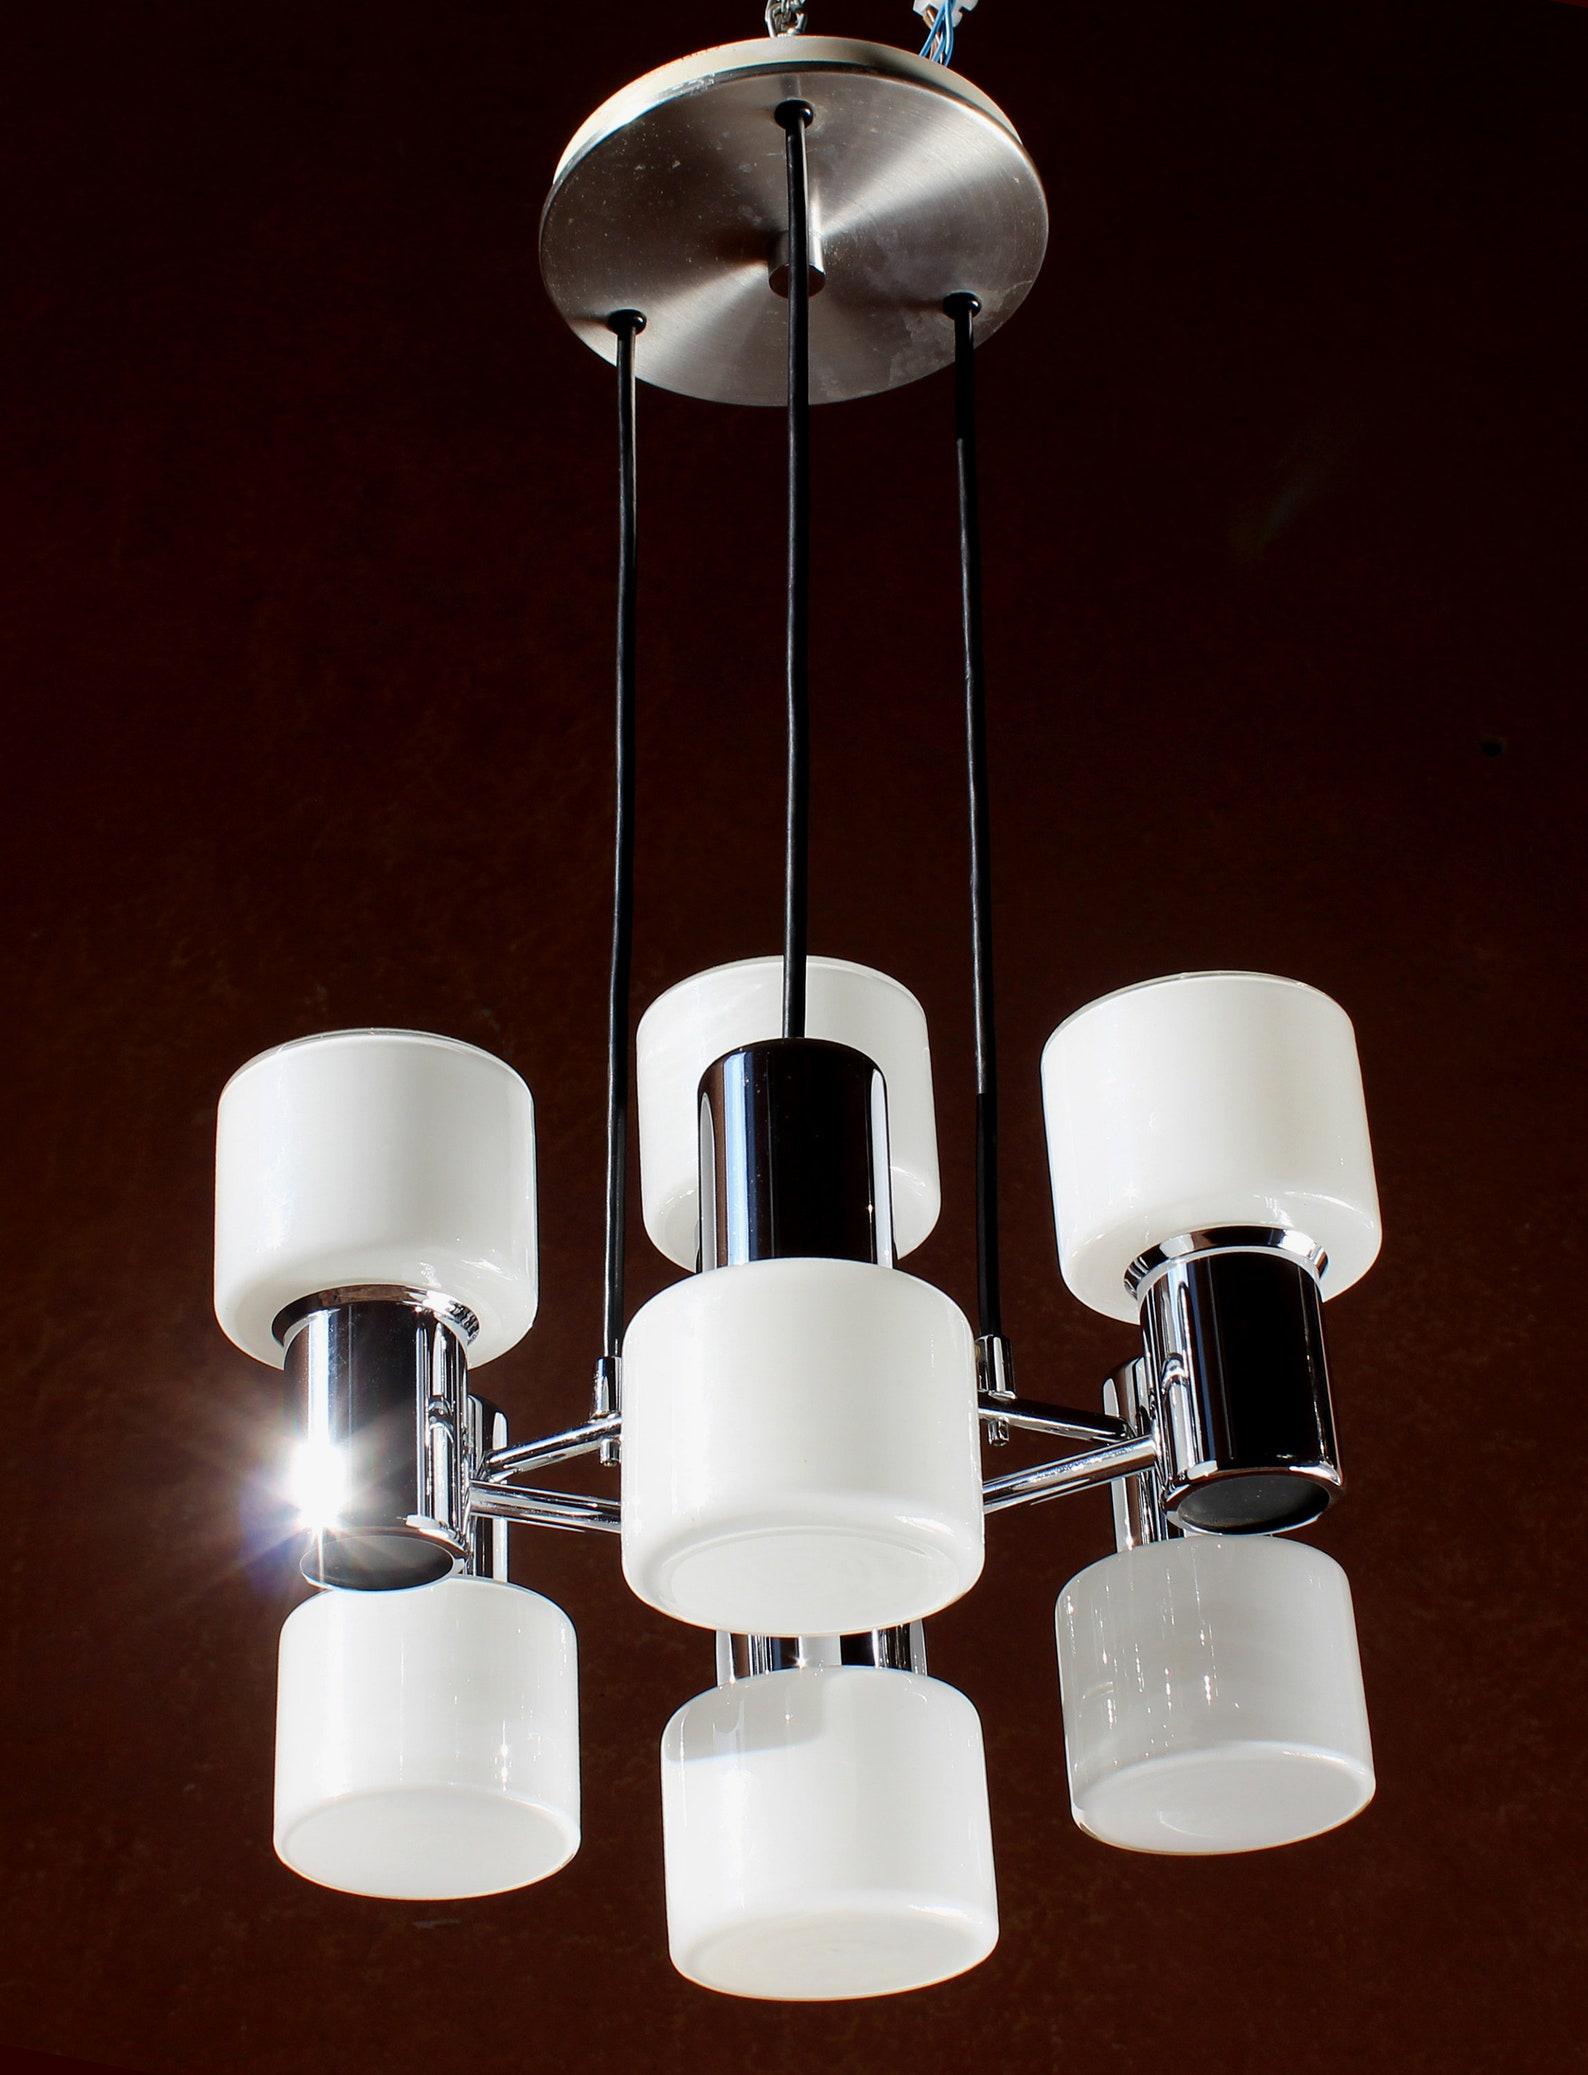 ELEGANT DORIA MODERNIST CHROMED, OPAL GLASS CEILING LAMP GERMANY 1970s

DIAMETER 14,5 INCHES HEIGHT OF THE BODY 11,5 INCHES TOTAL ORIGINAL HEIGHT 25 INCHES

The gorgeous 8 lights (E14) ceiling light is in nearly perfect original condition, careful